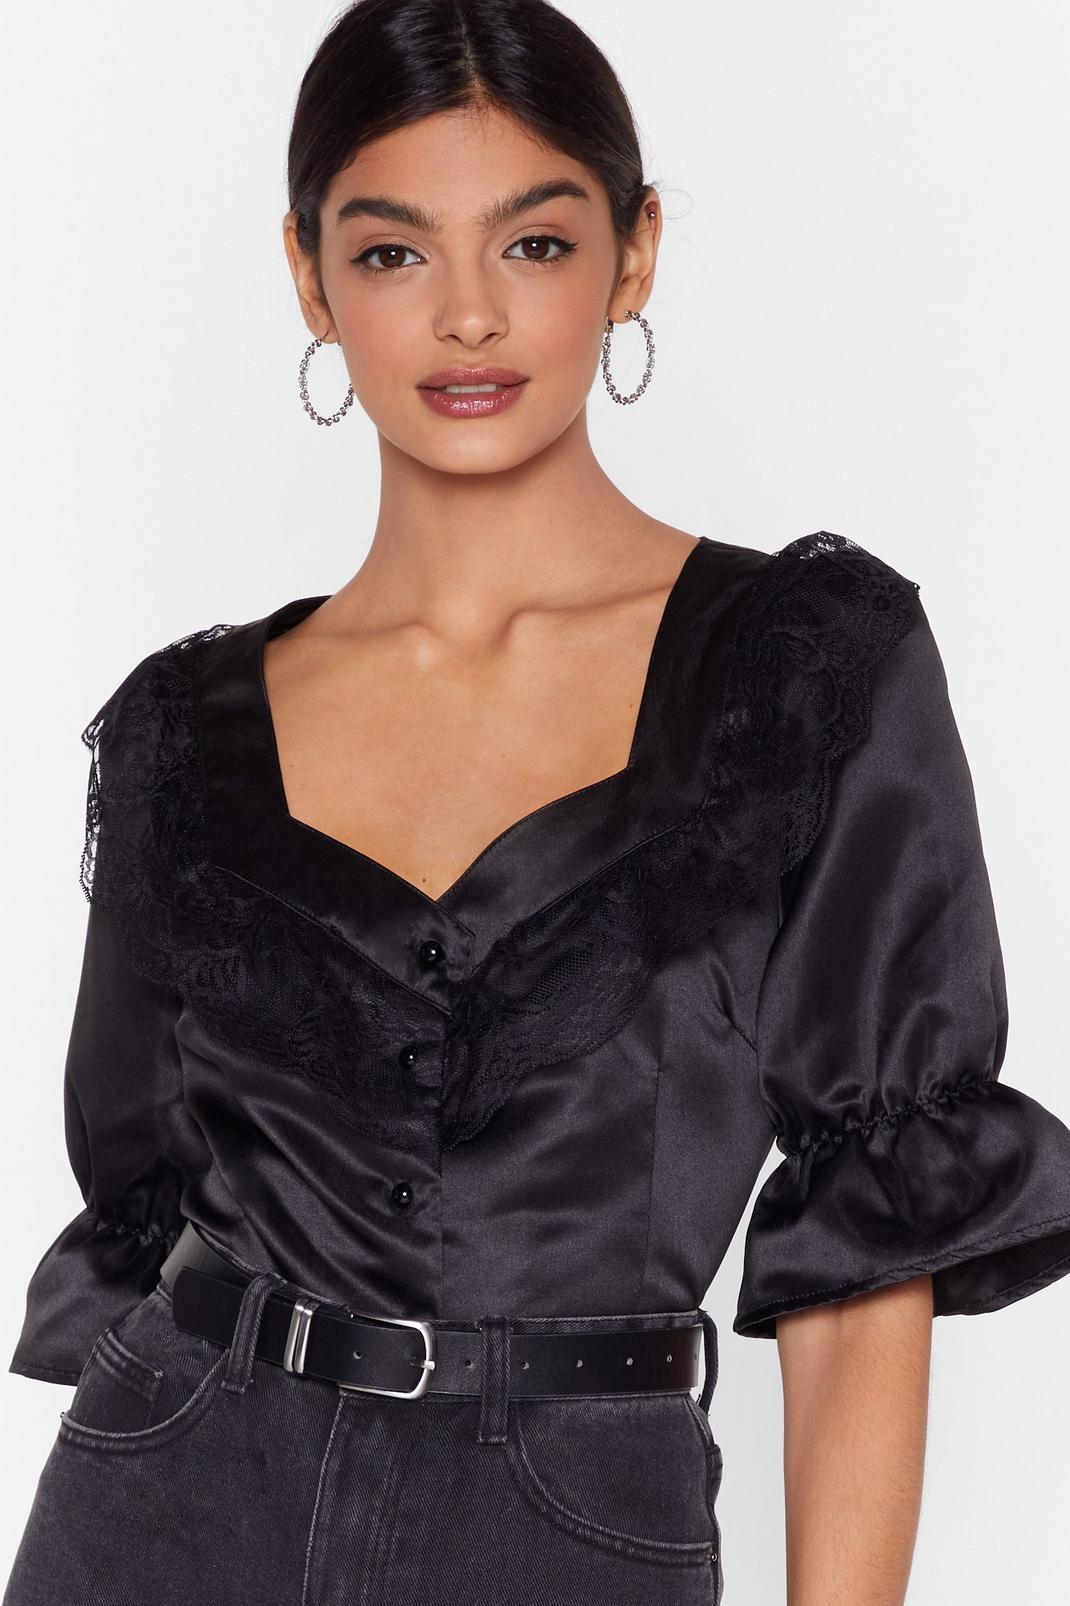 Save Us a Lace Satin Blouse image number 1